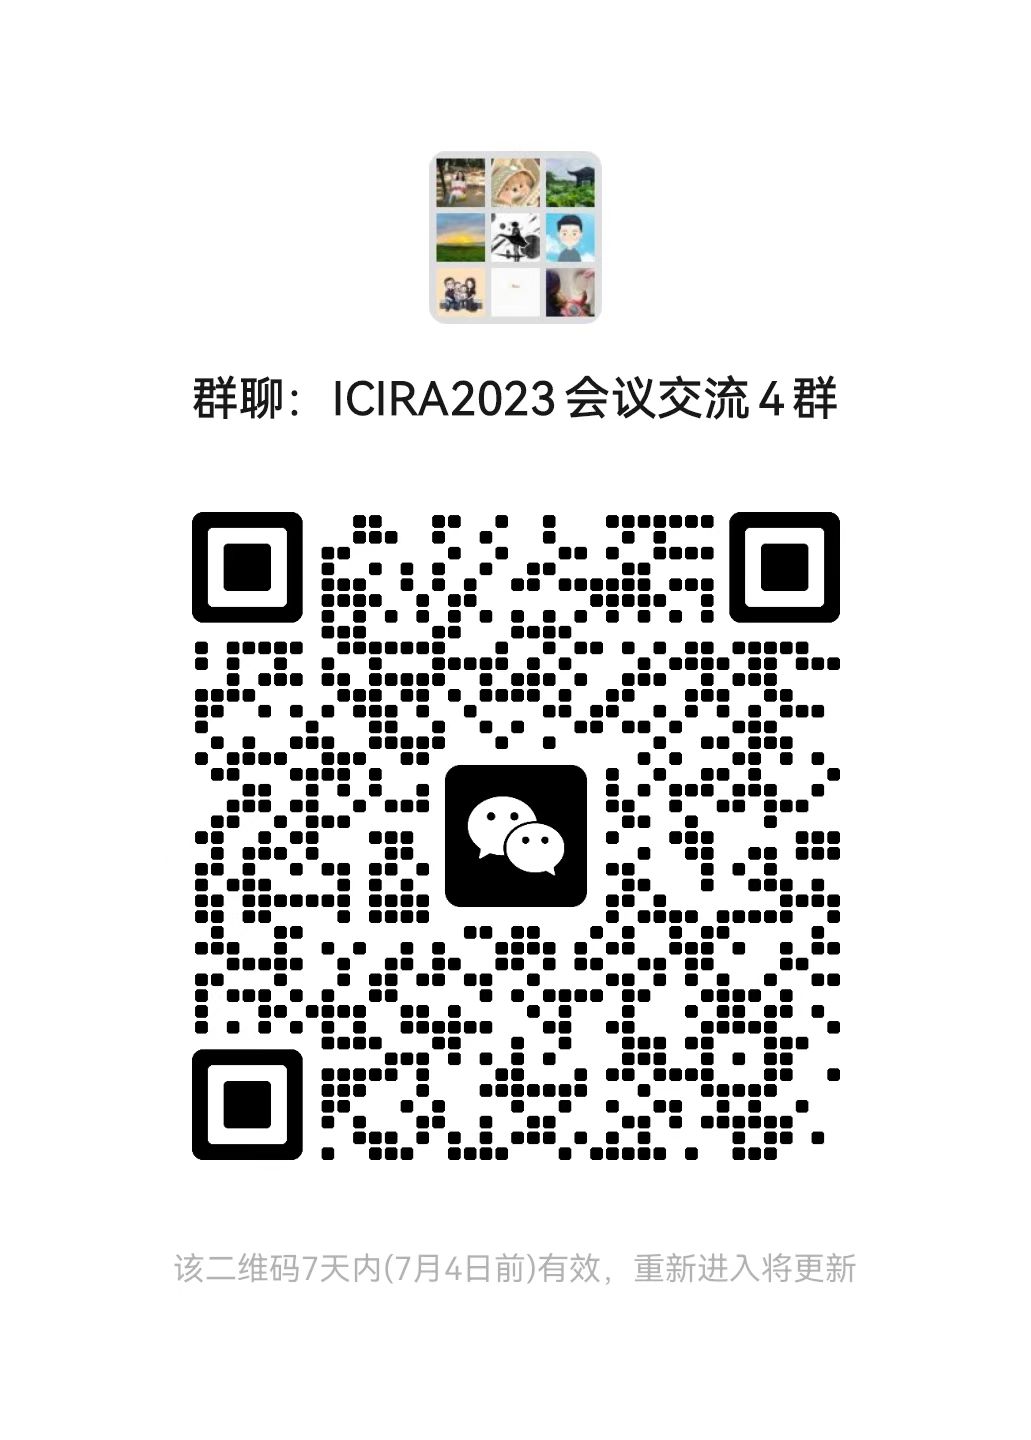 WeChat Group3